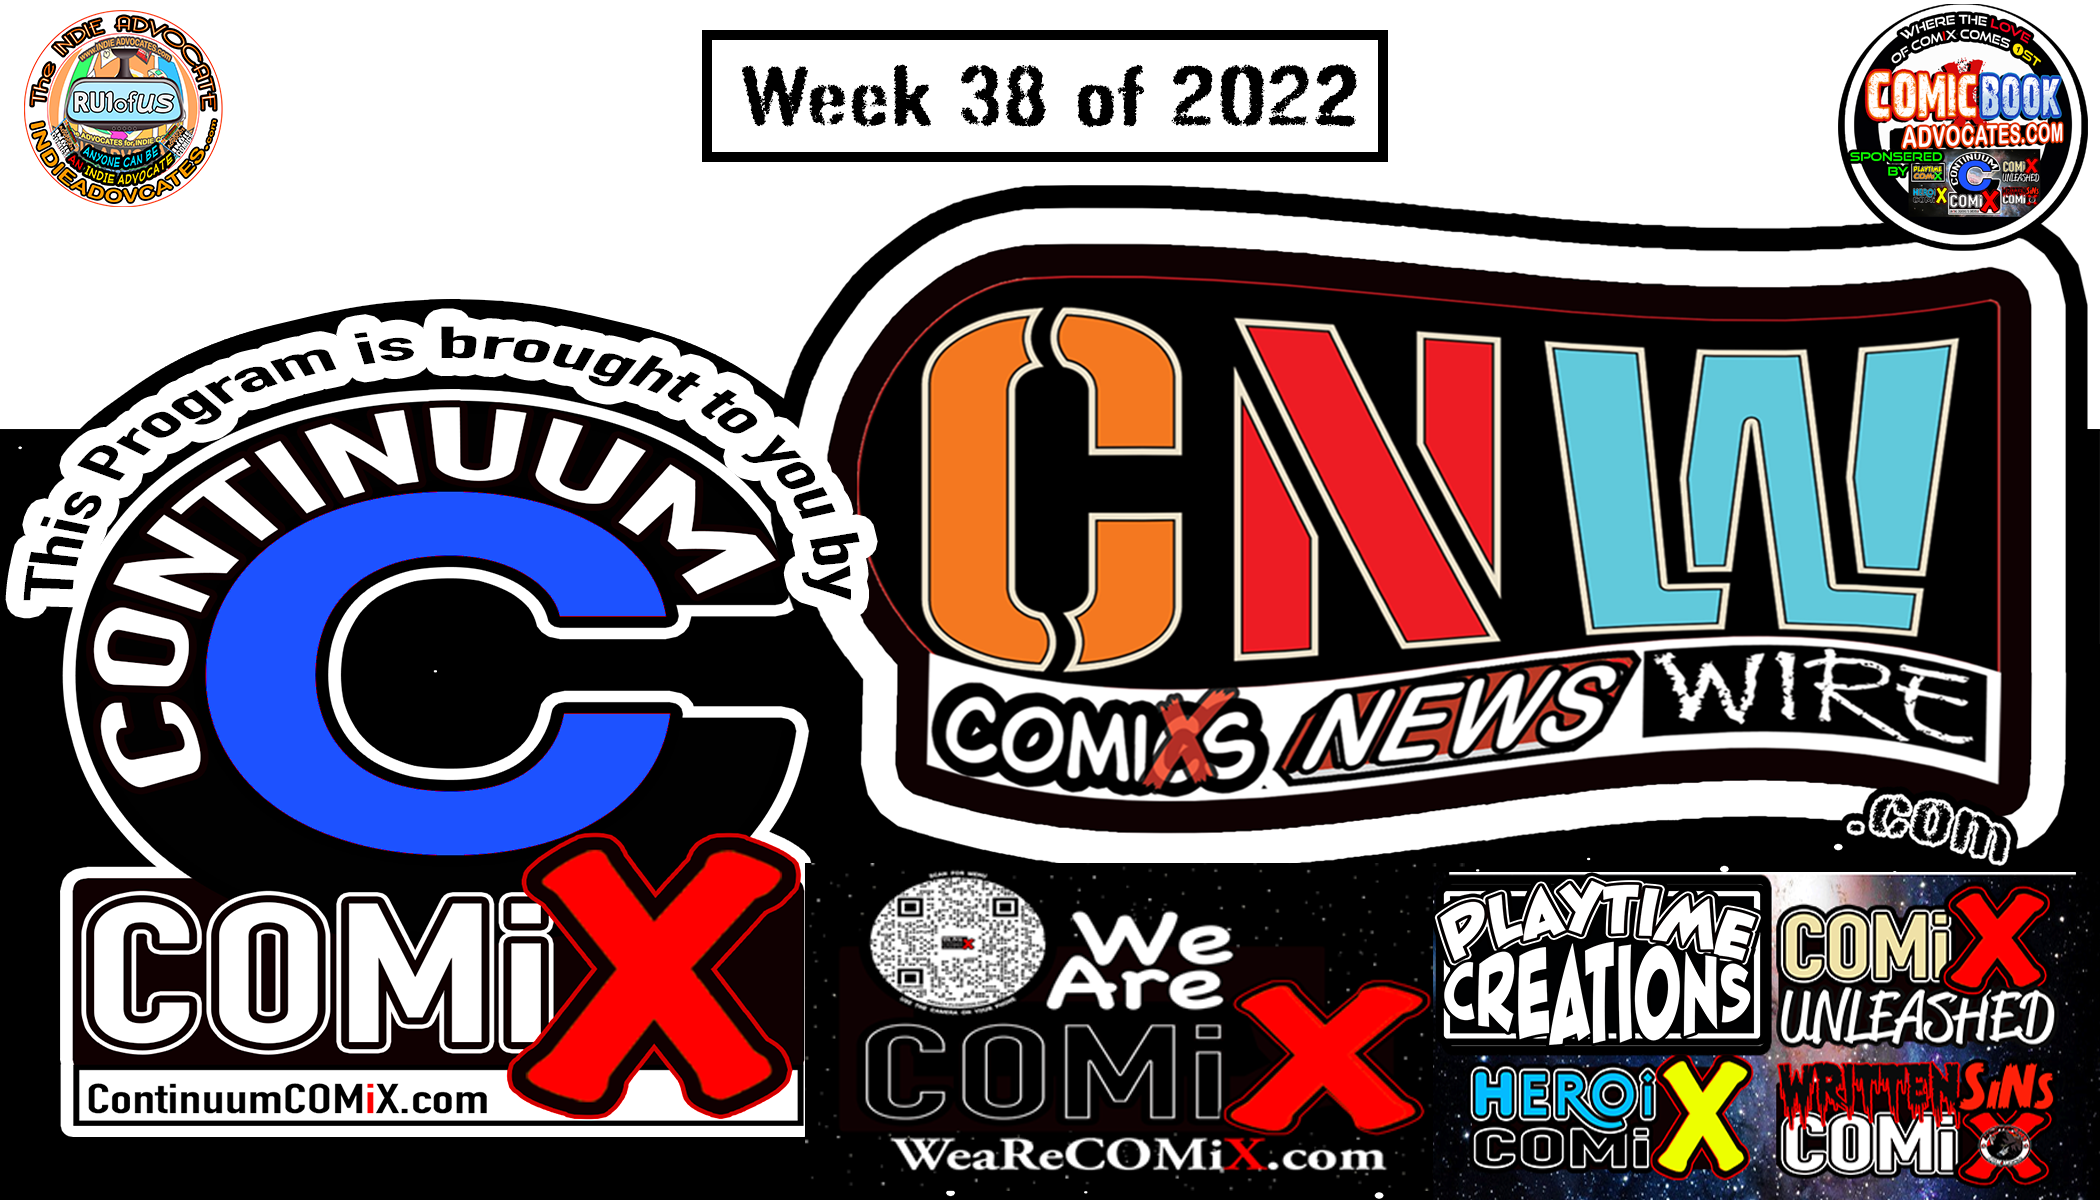 -THE COMiX NEWS WiRE: Week 38: 9/19-25/22 brought to you by Continuum COMiX